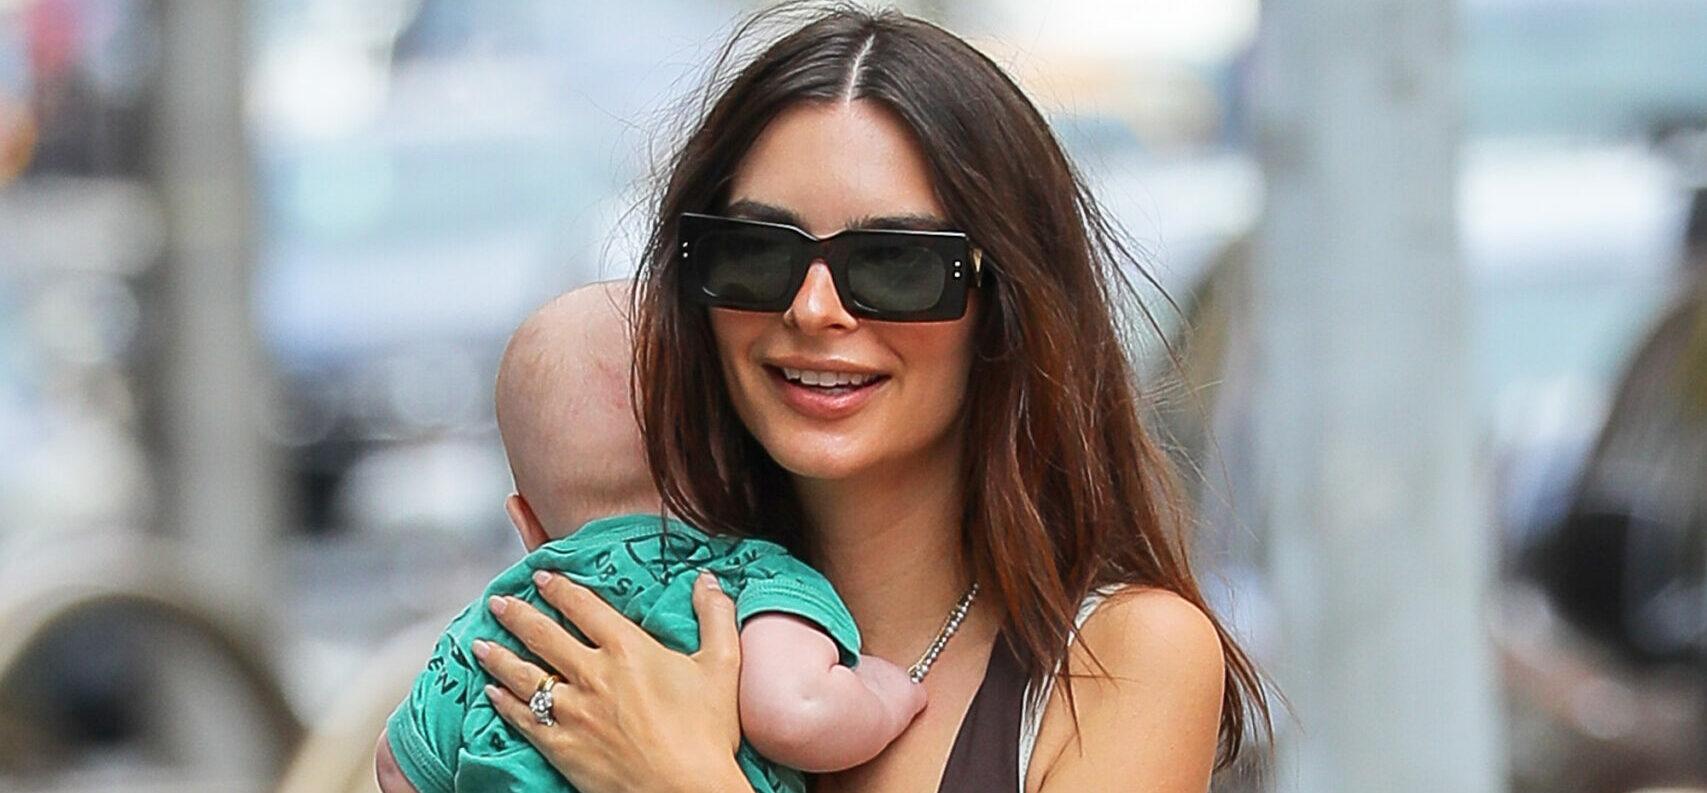 Emily Ratajkowski is all smiling while carrying her Baby as they taking a stroll with husband Sebastian Bear-McClard in NYC